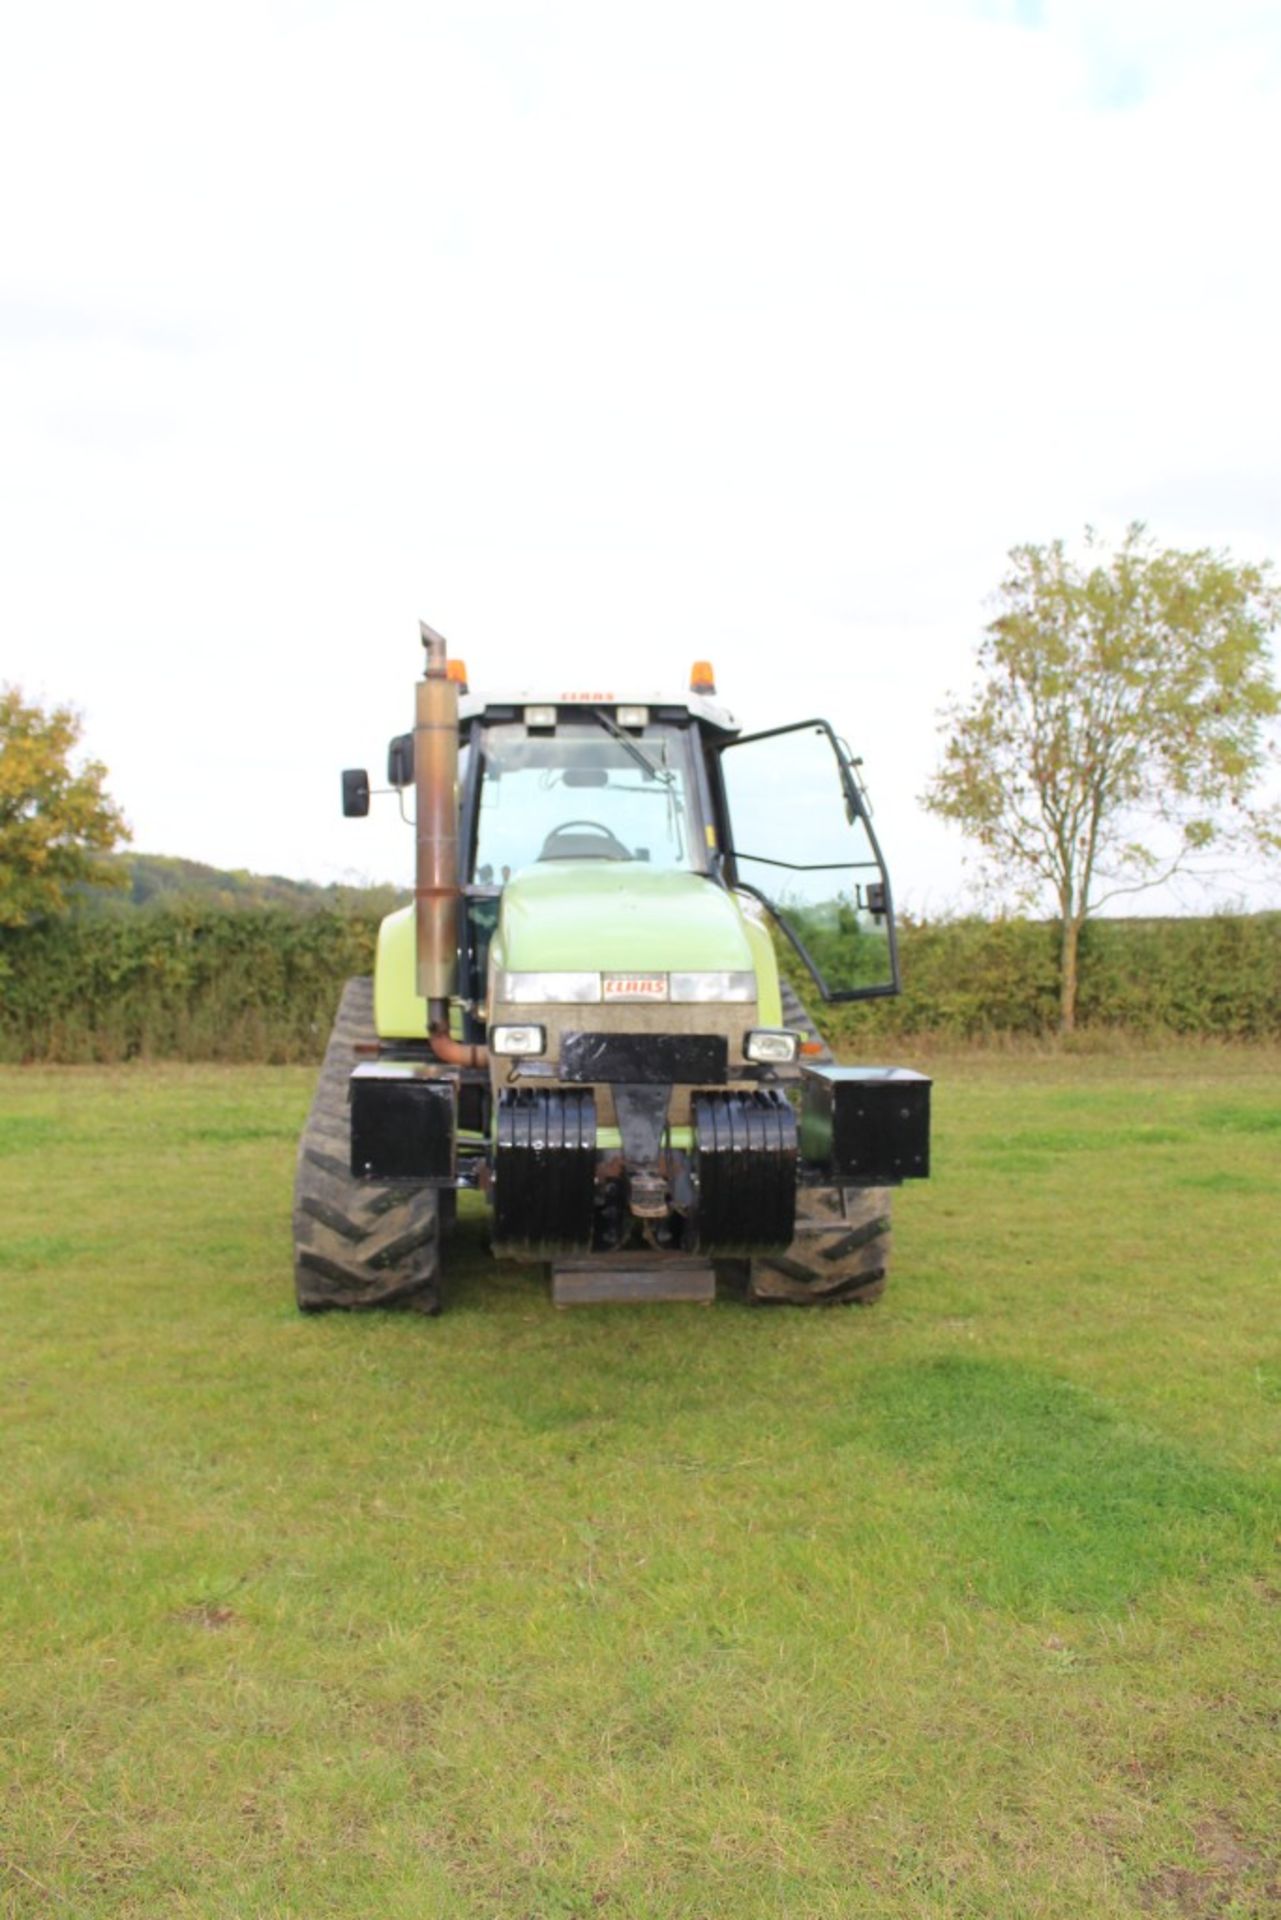 1999 Claas Challenger 55 - Image 2 of 13